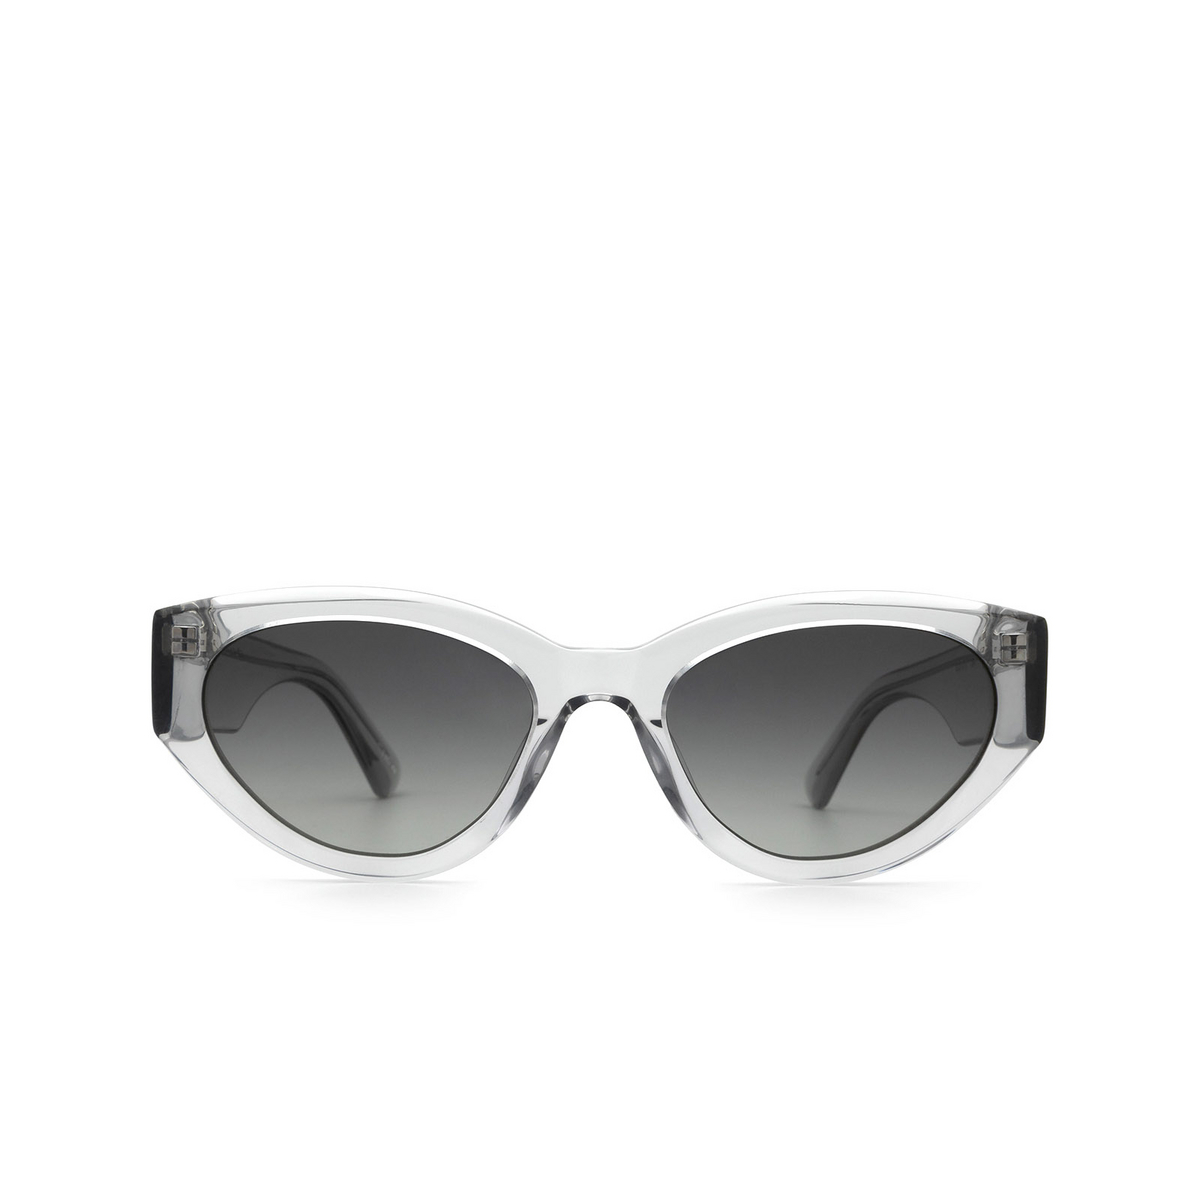 Chimi 06 Sunglasses GREY - front view